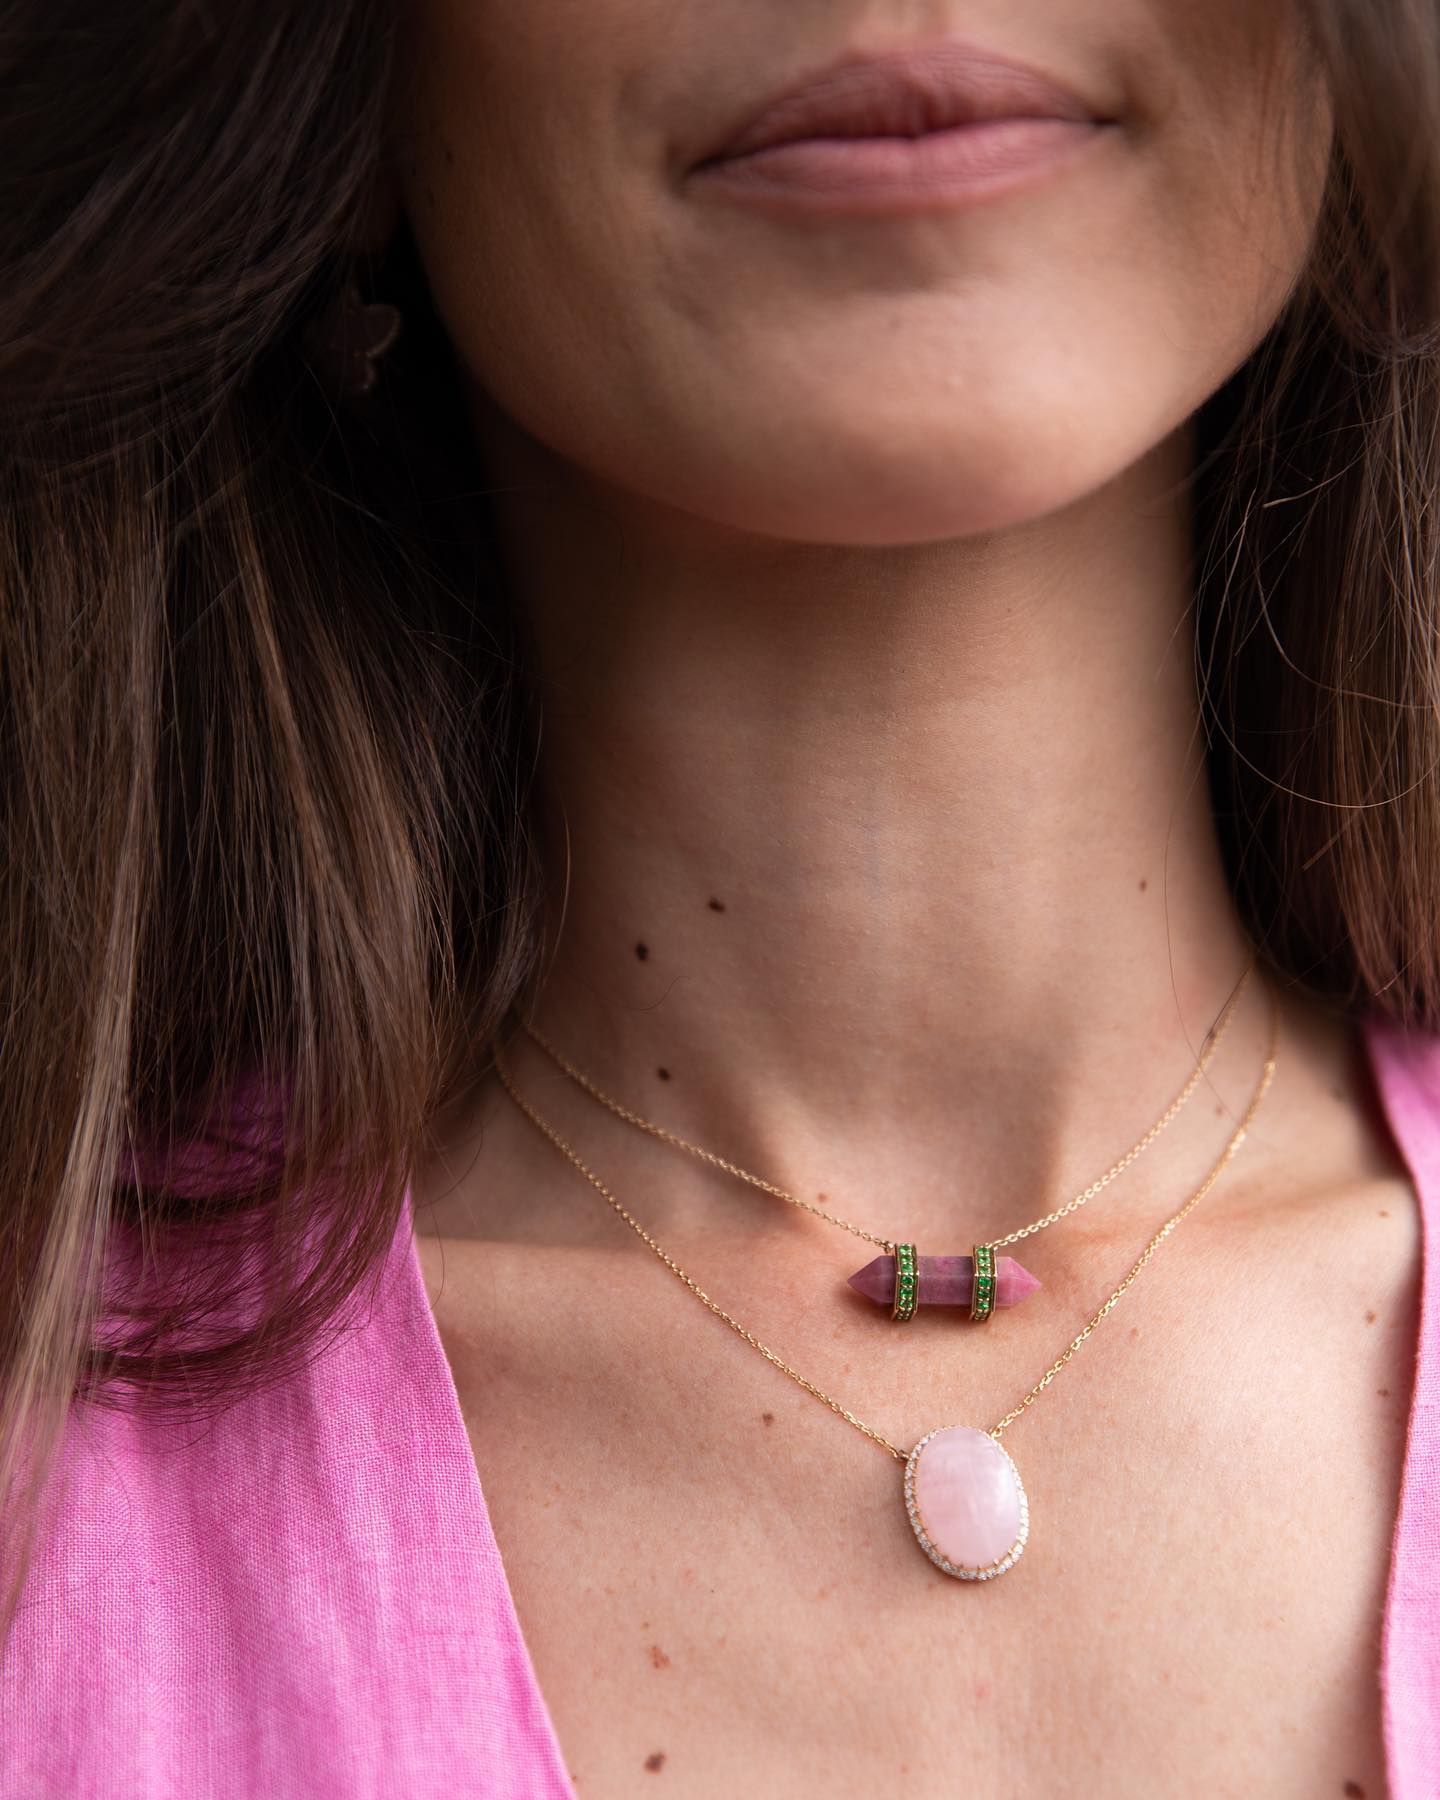 The #pink edit 💗 featuring the Pendule Necklace in Rhodochrosite, Tsavorites and 18 ct Yellow Gold & the Scarabée Necklace in Rose Quartz, Diamonds and 18 ct Yellow Gold #myritazia

#summer #jewelry #summervibes #summerstyle #fashion #shopping #onlineshopping #genevaswitzerland #geneva